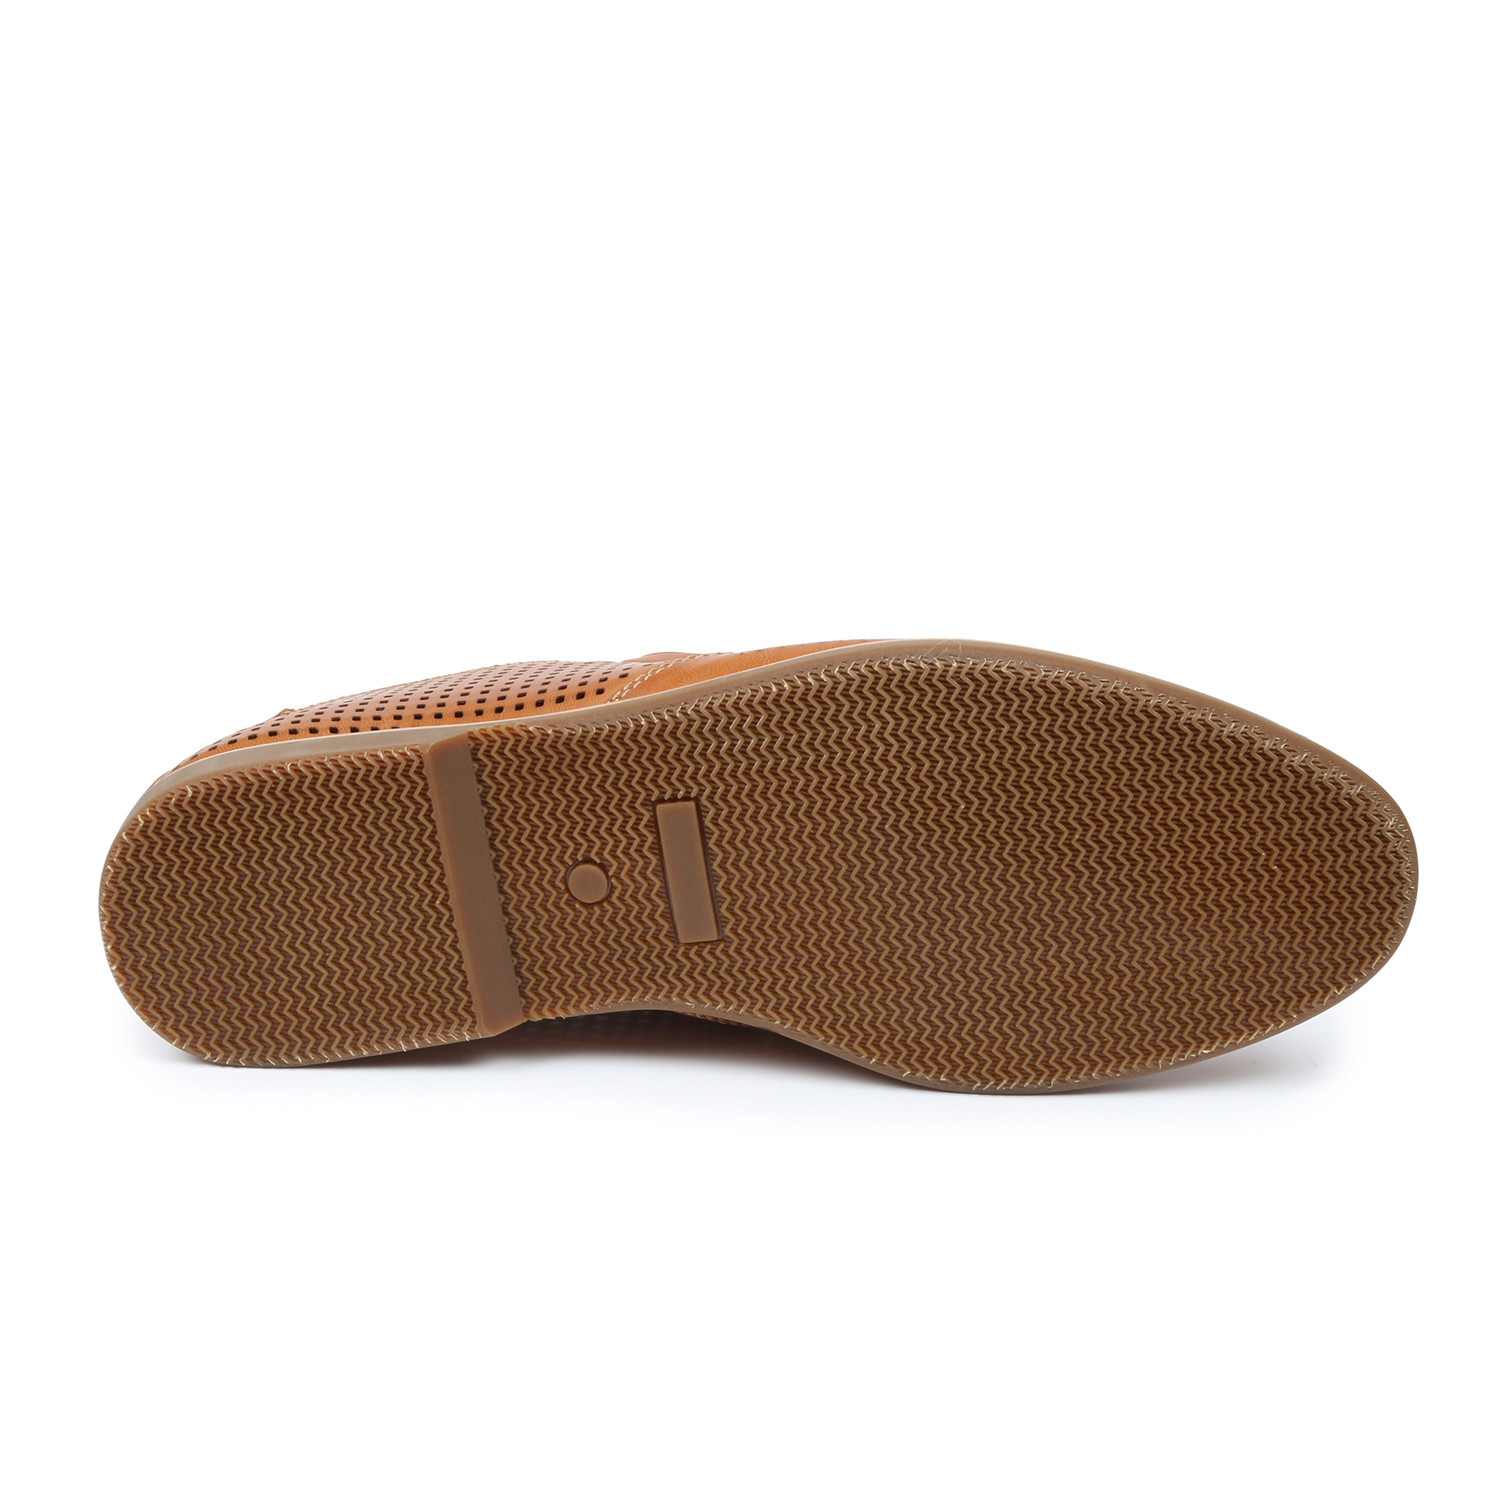 Krown Perforated Loafer // Tan (US: 7) - GBX - Touch of Modern